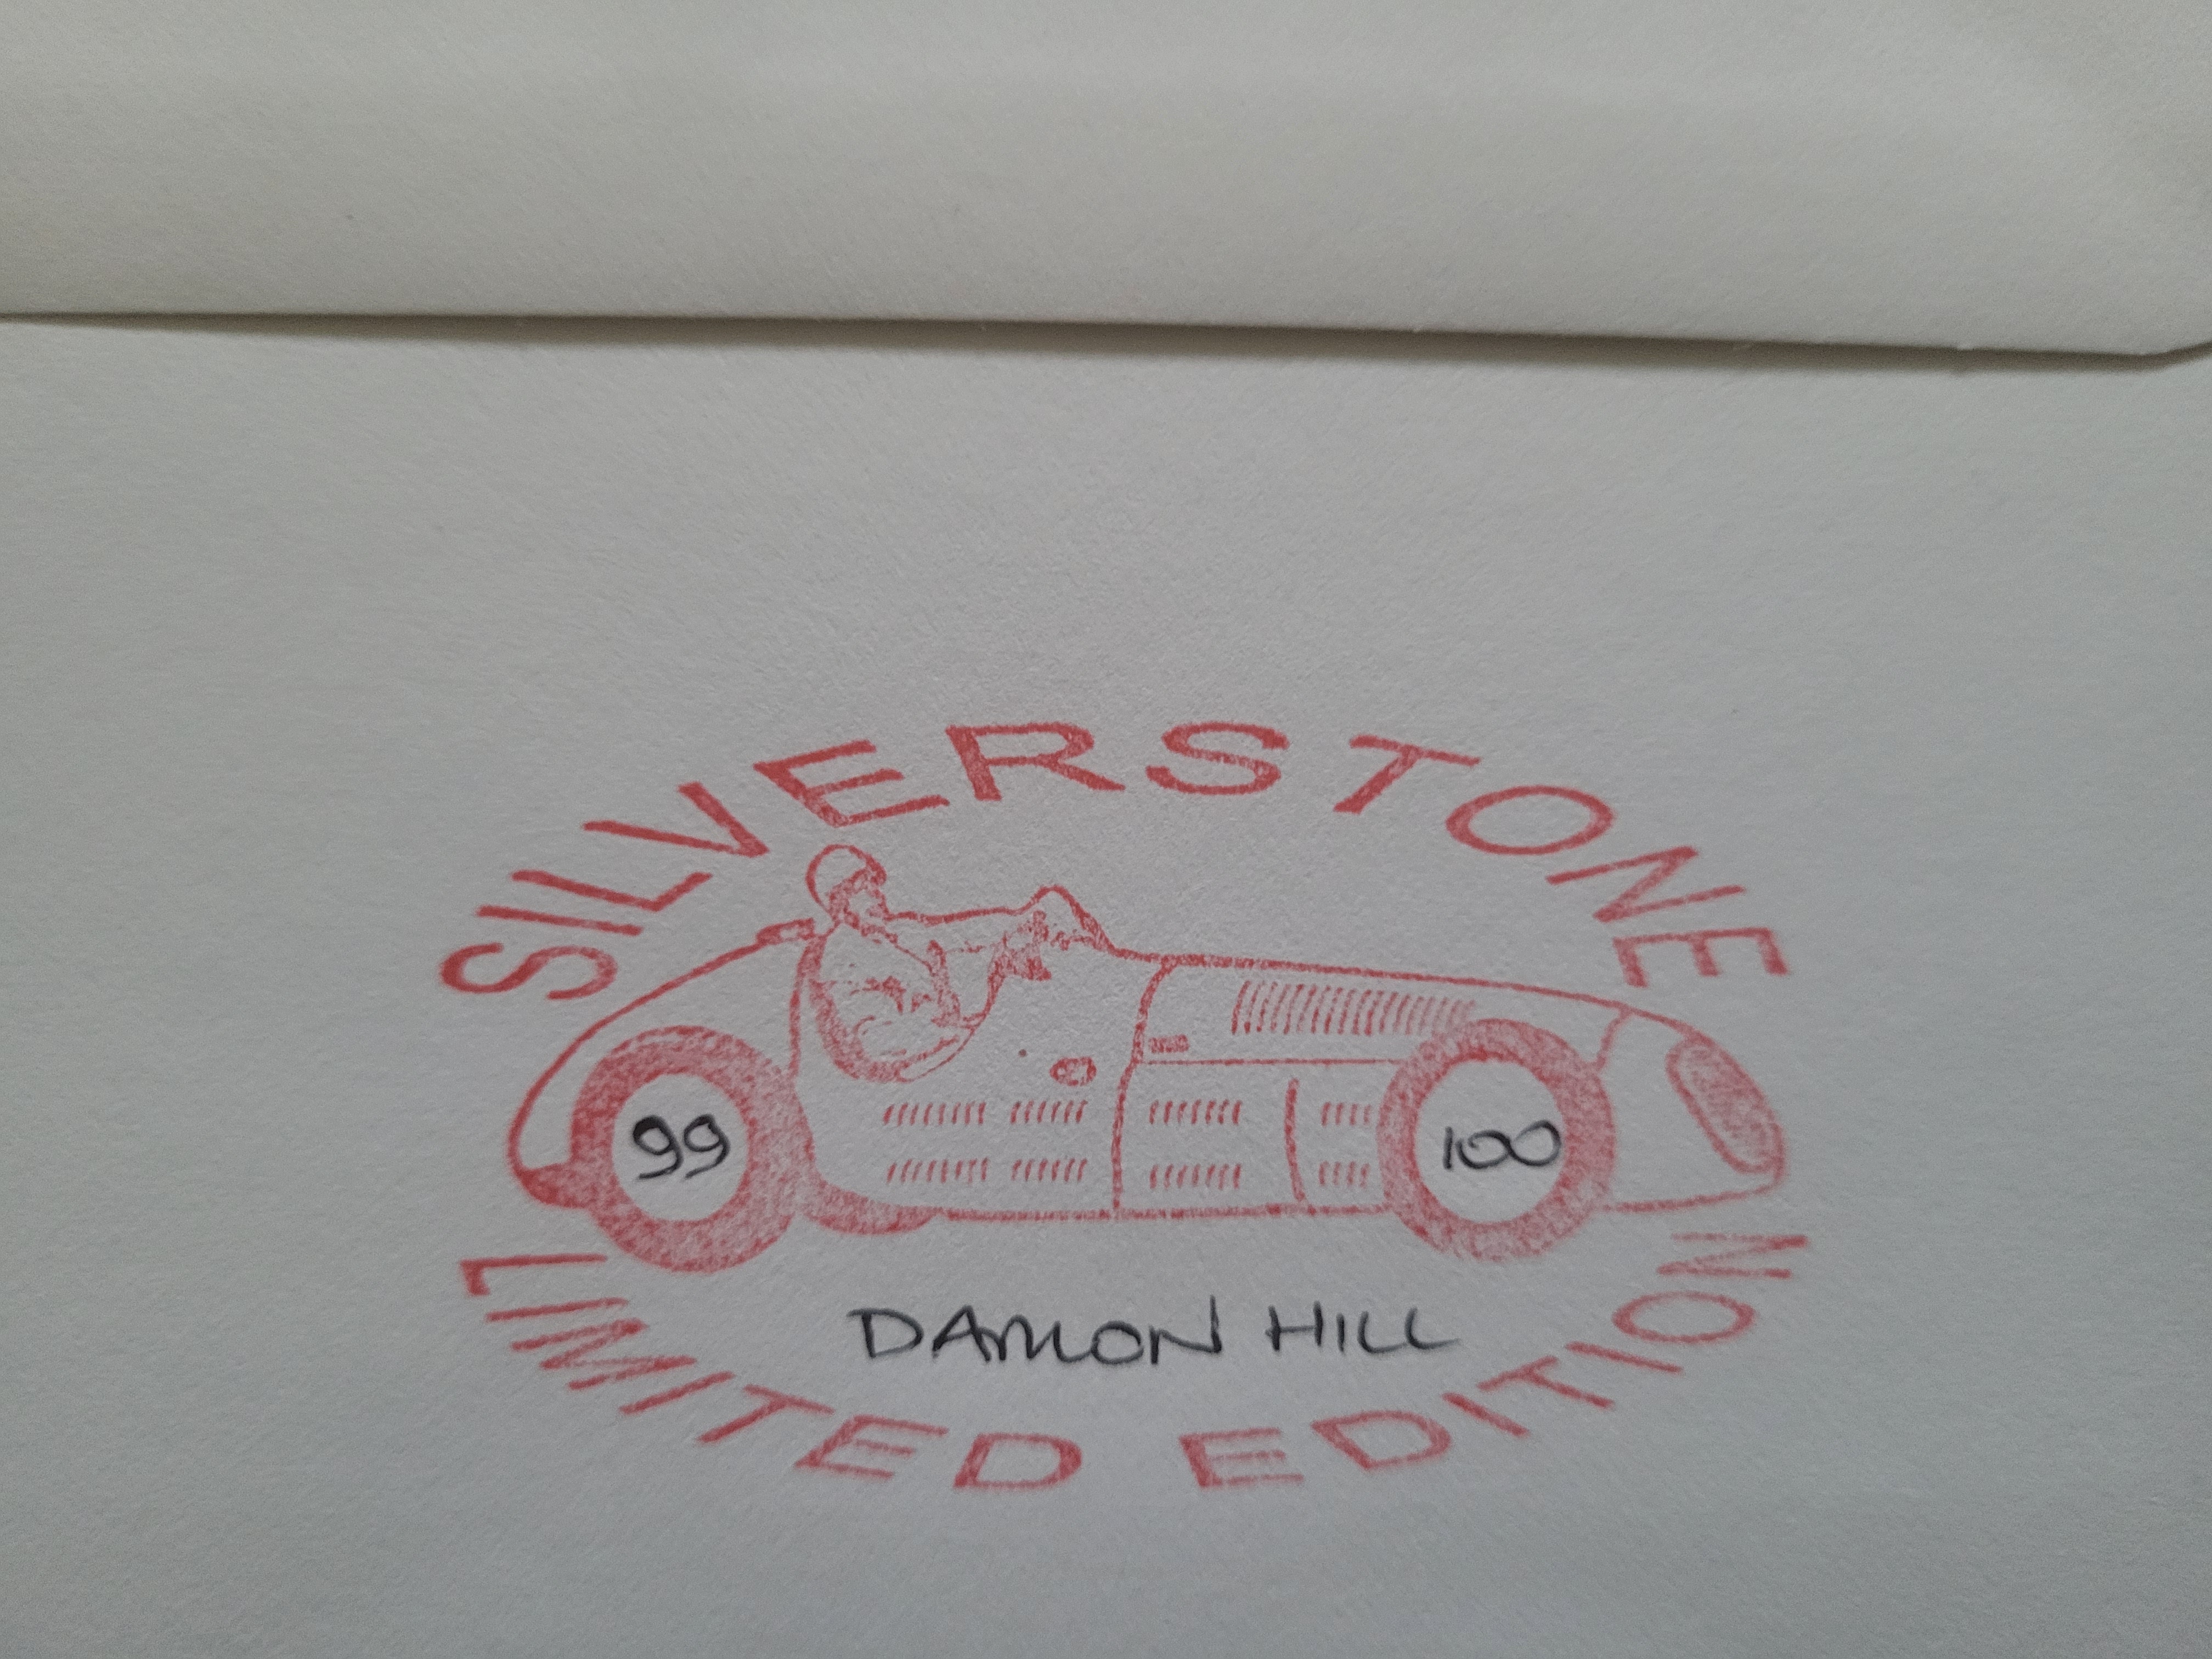 2002 SLVERSTONE MOTOR RACING LTD EDITION POSTAL COVER AUTOGRAPHED BY DAMON HILL - Image 2 of 2